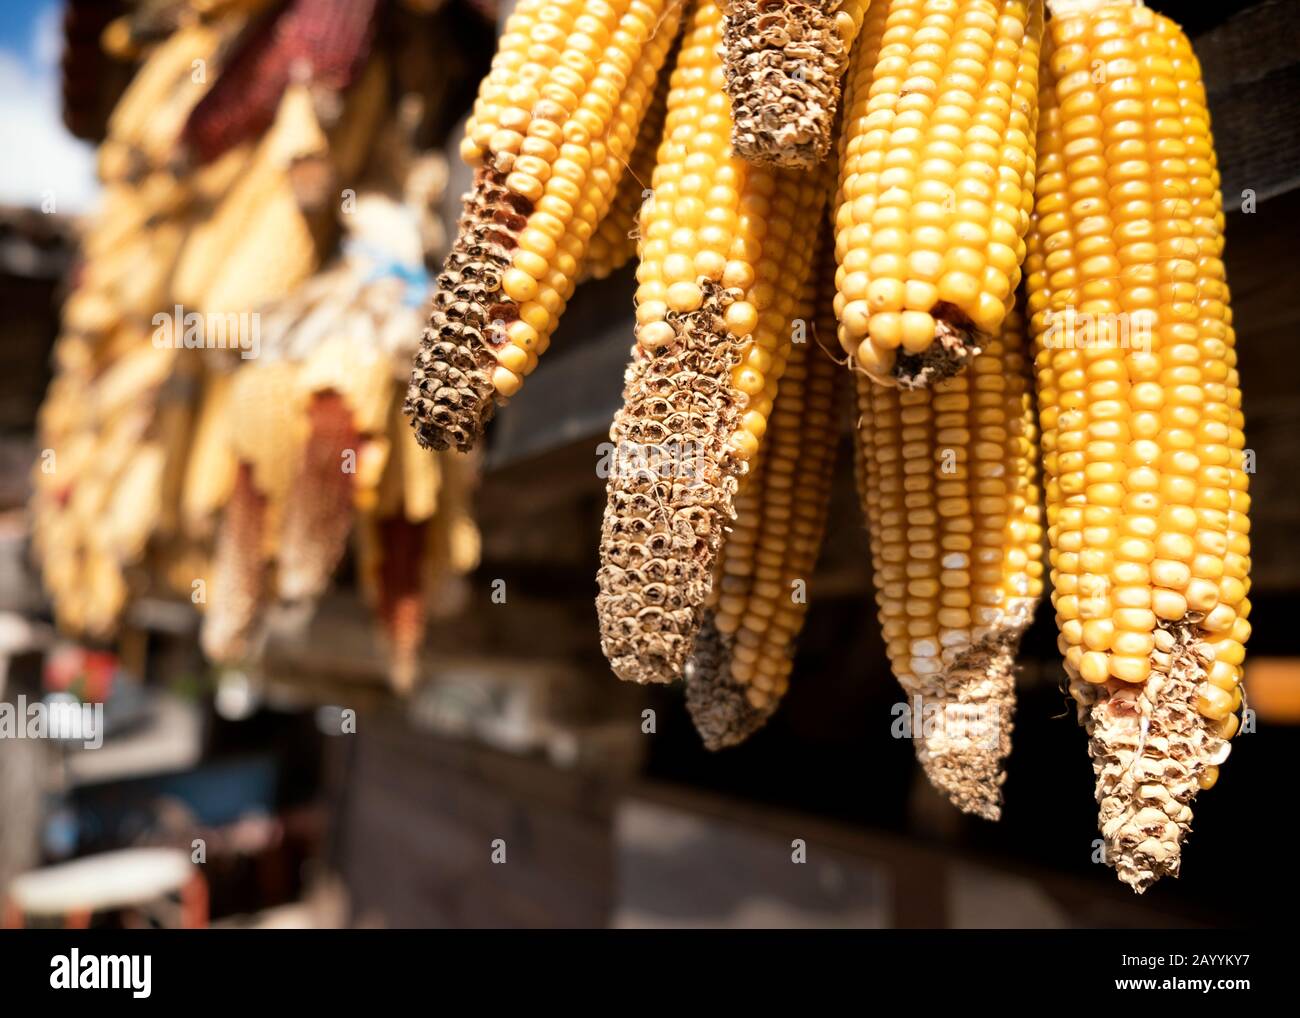 Close-up view of a group of maize (Zea mays) ears of corn hanging from a hórreo in Pedroveya (Quirós, Principality of Asturias, Spain) Stock Photo